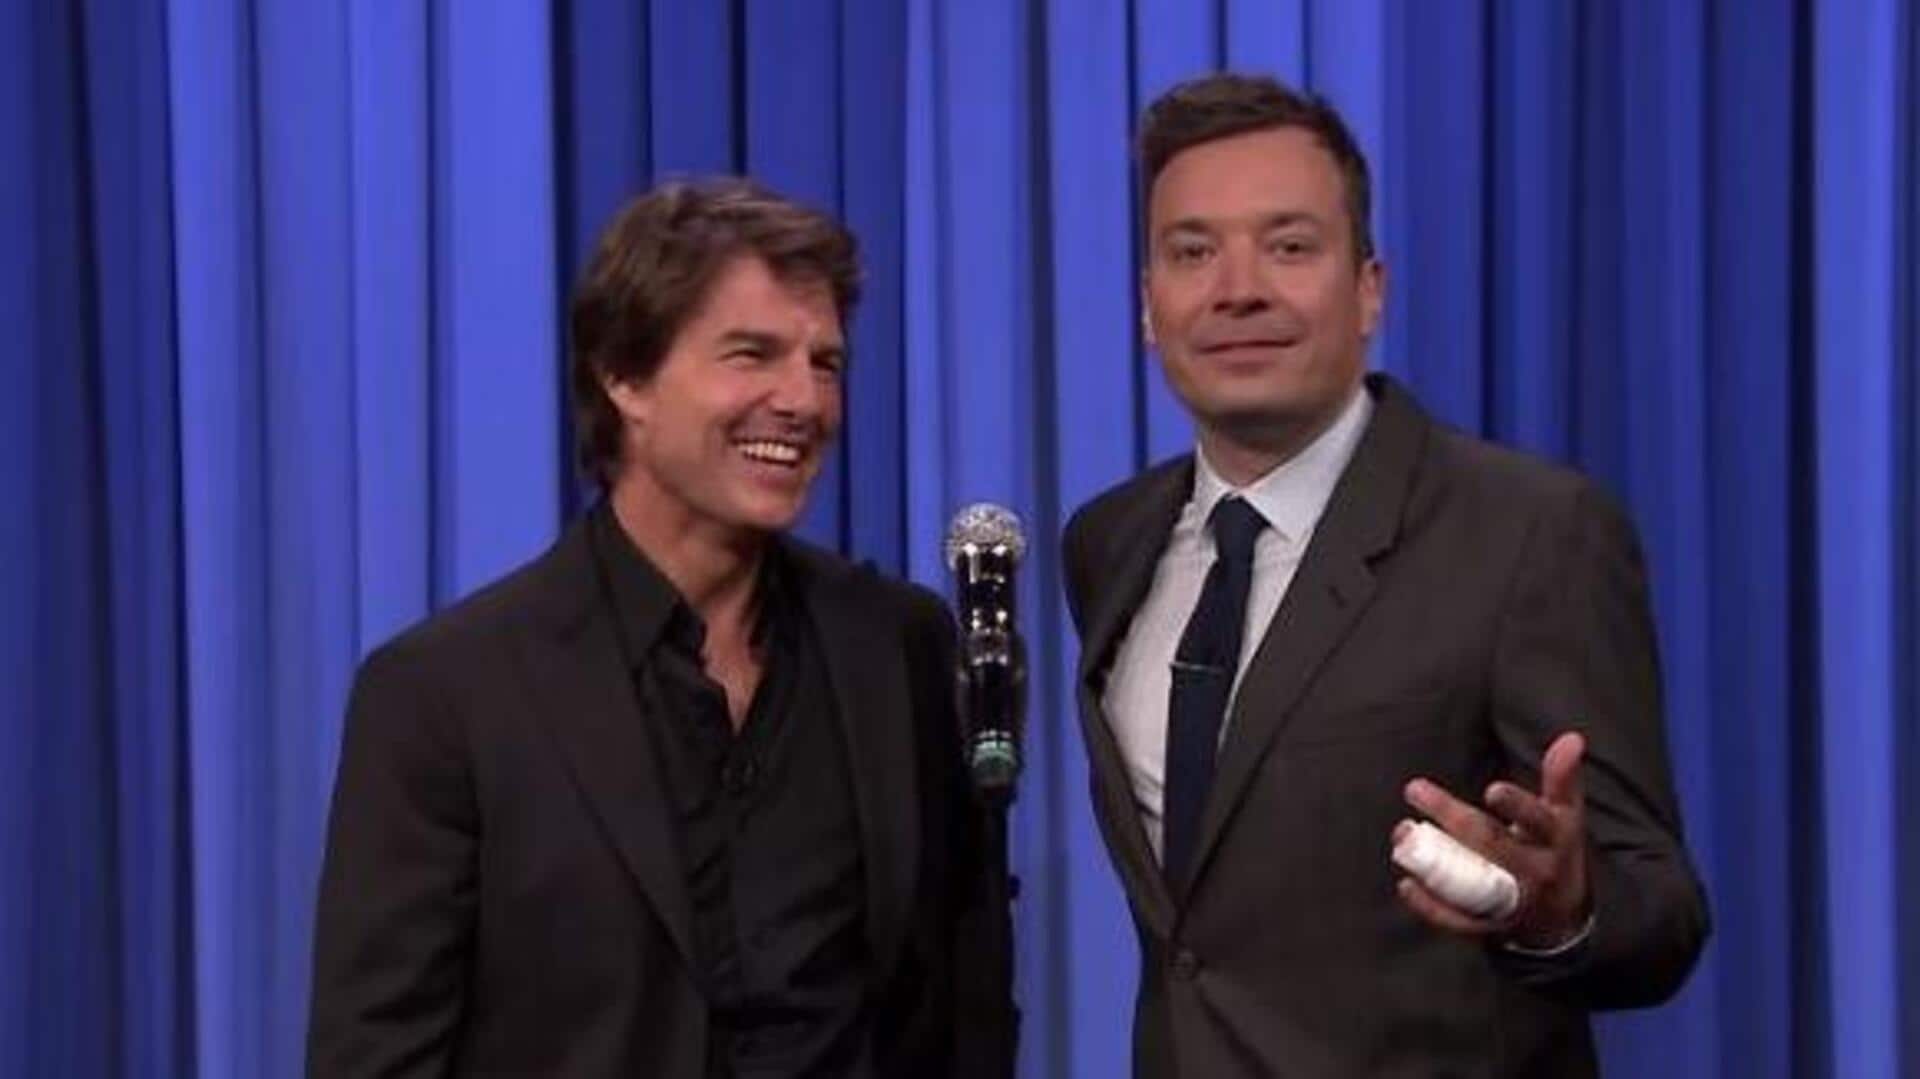 Iconic moments that Jimmy Fallon's 'The Tonight Show' gave us